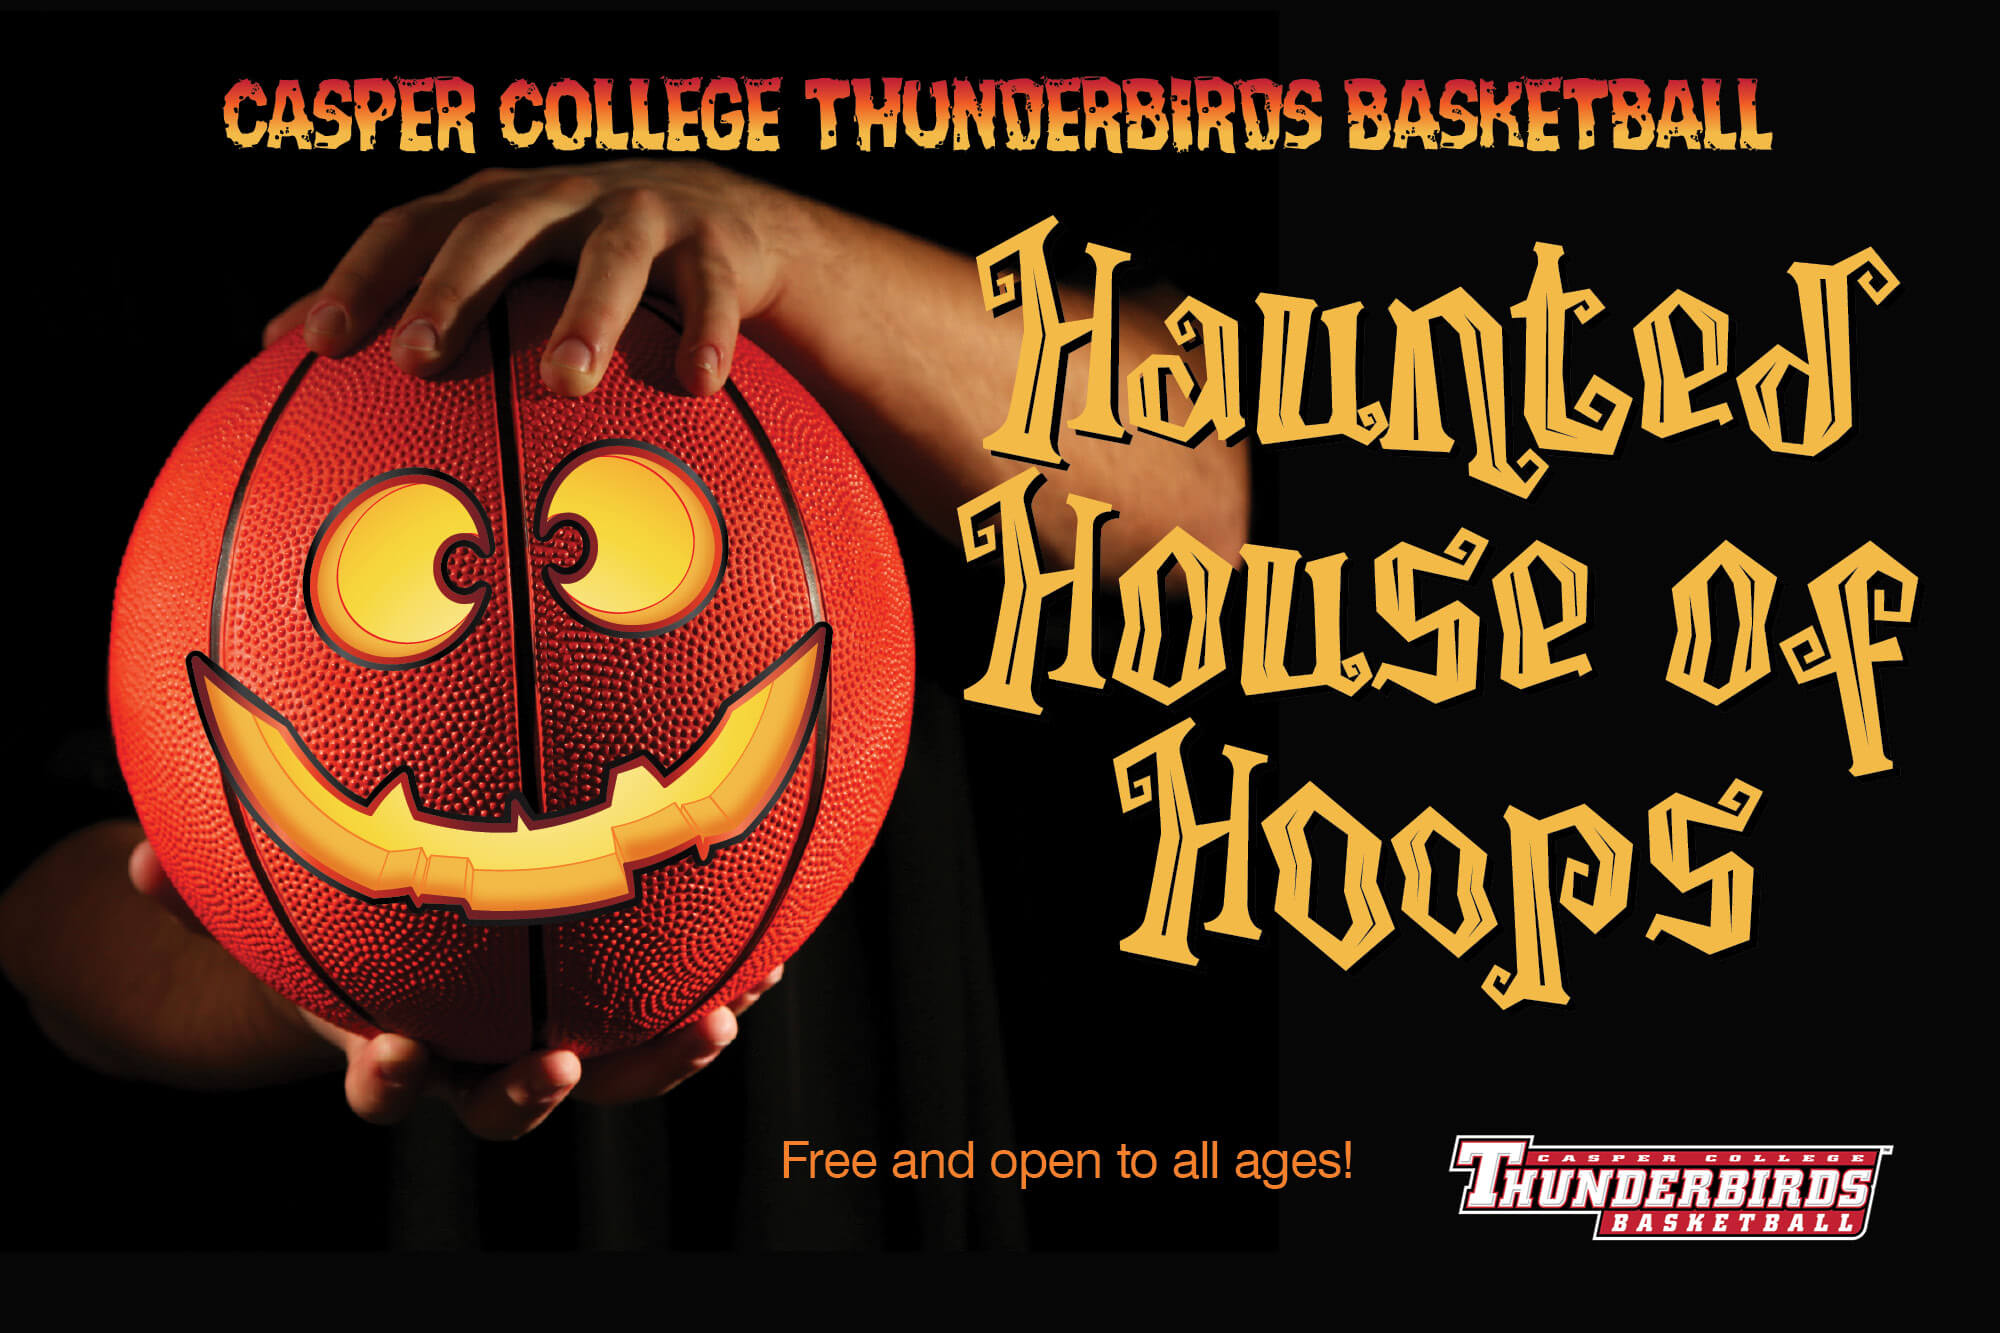 Image for "Haunted House of Hoops" press release.